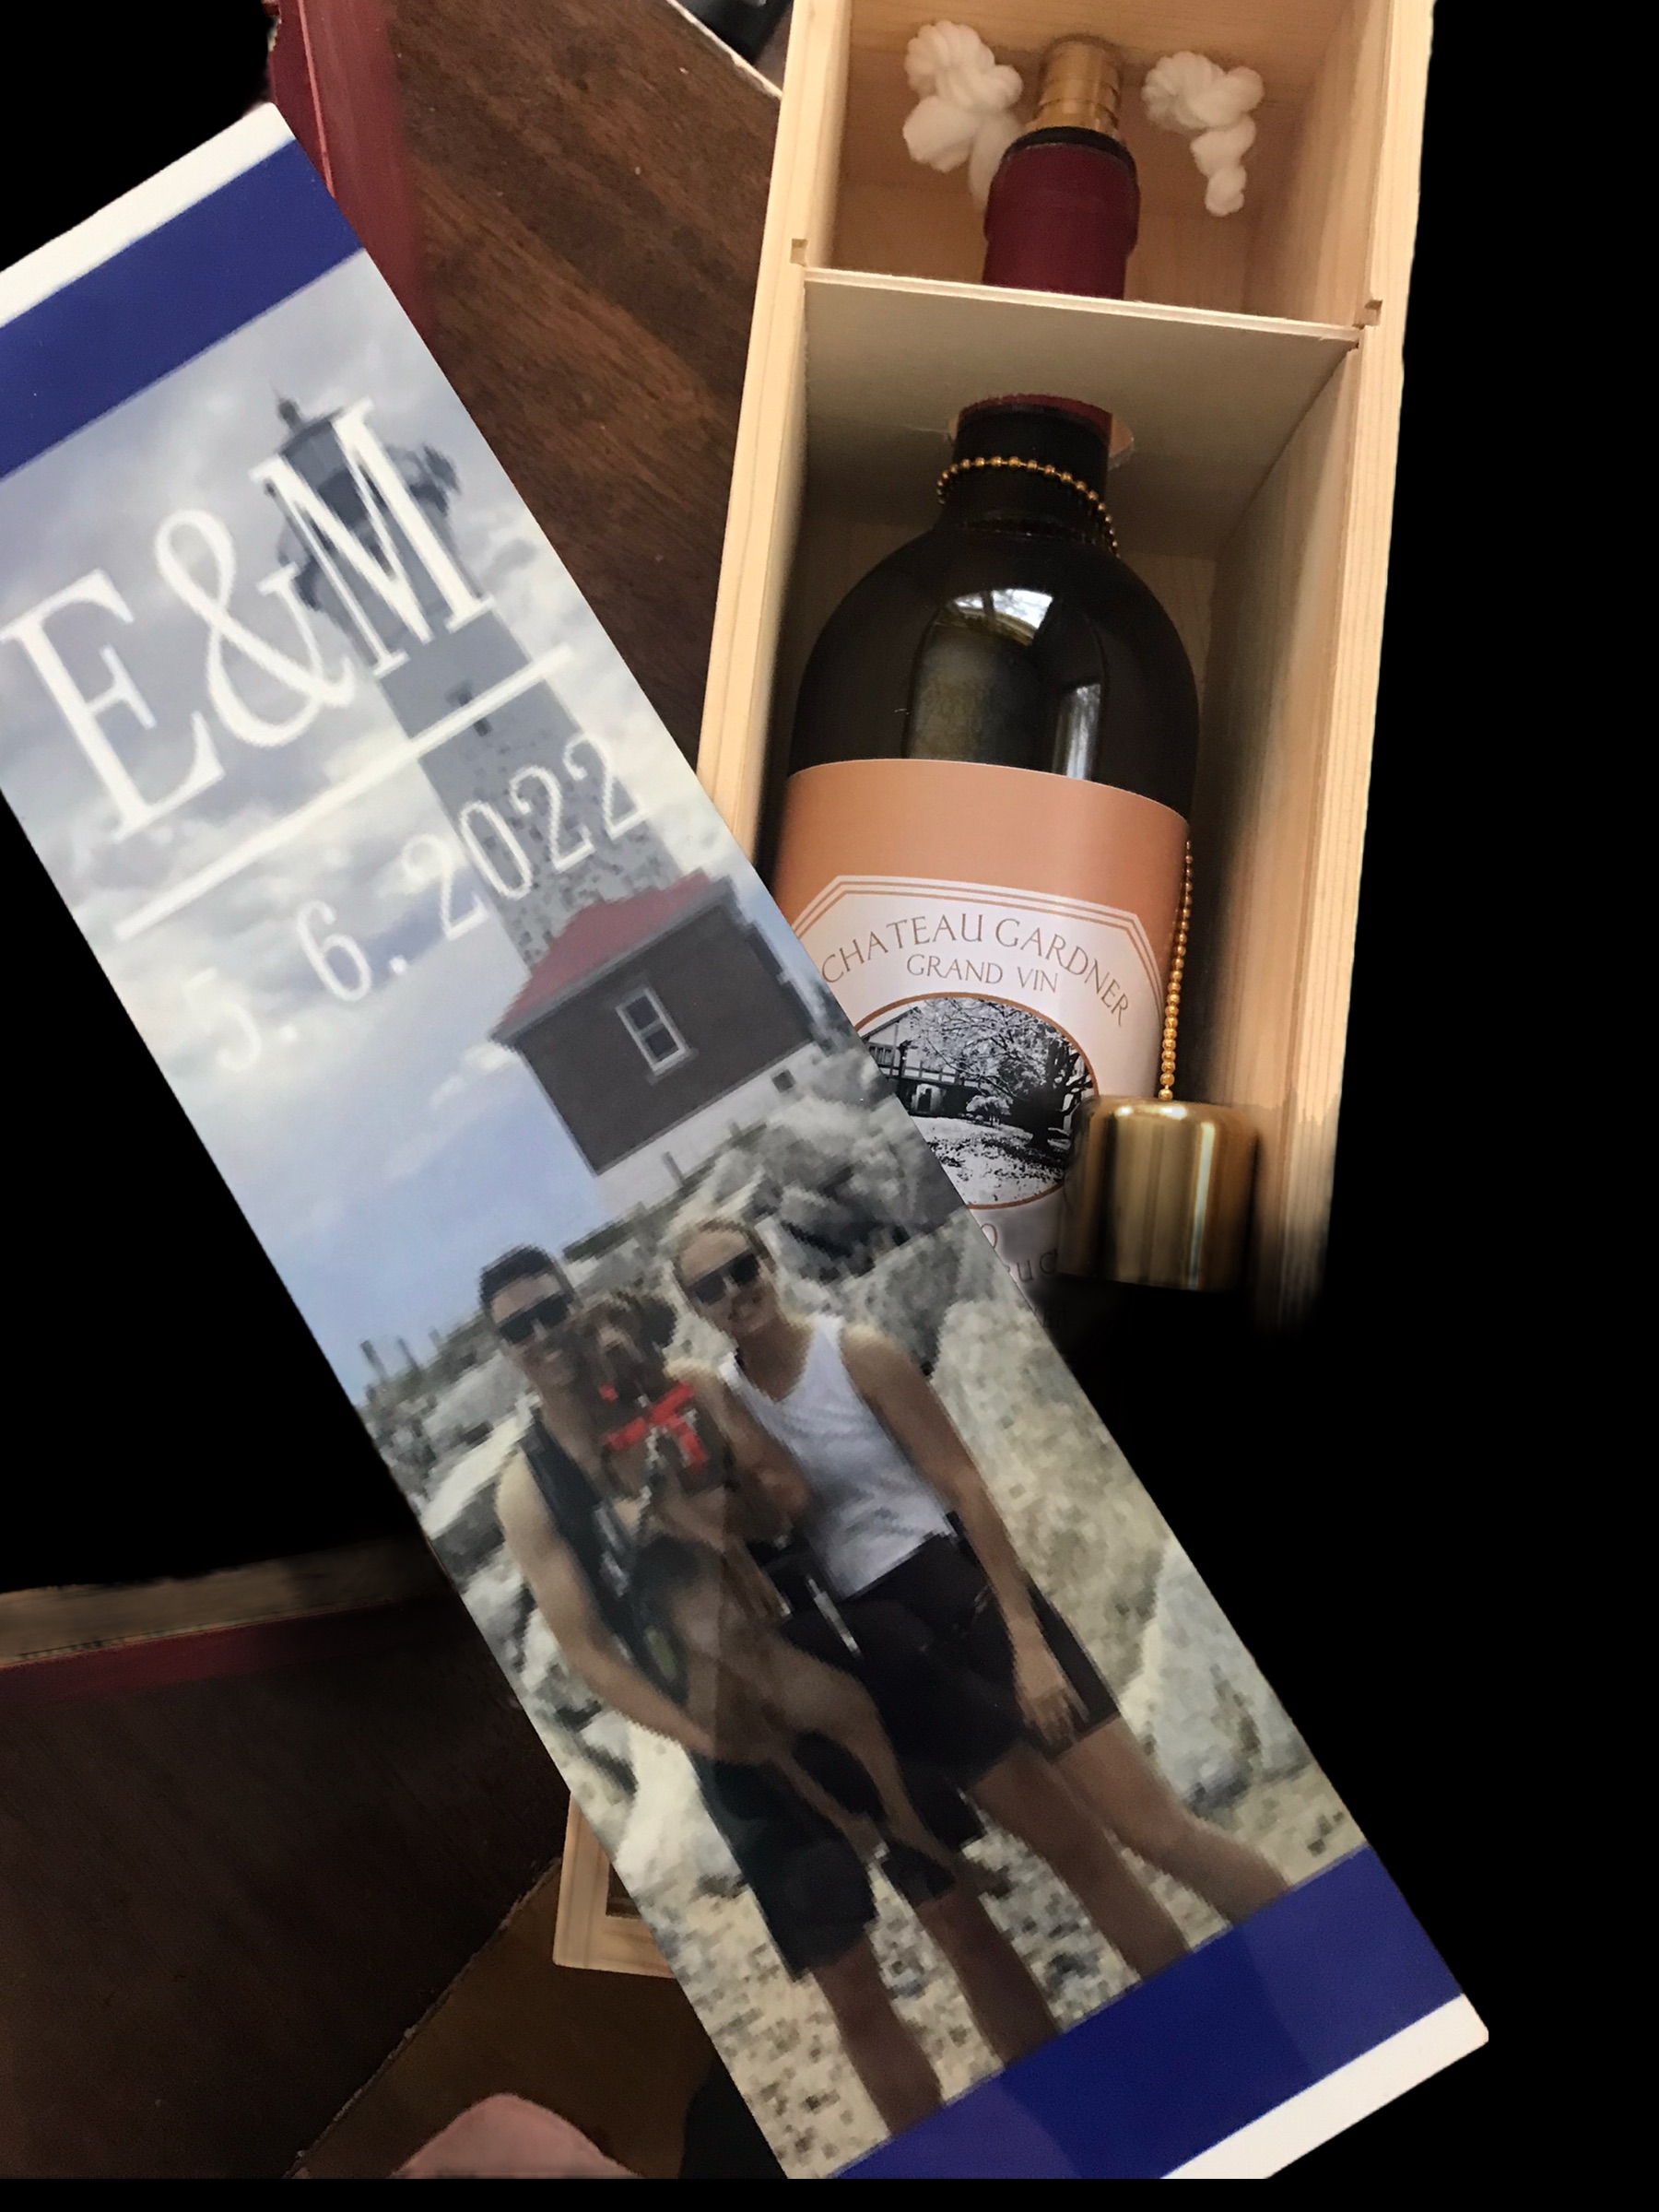 Wedding wine box made with sublimation printing